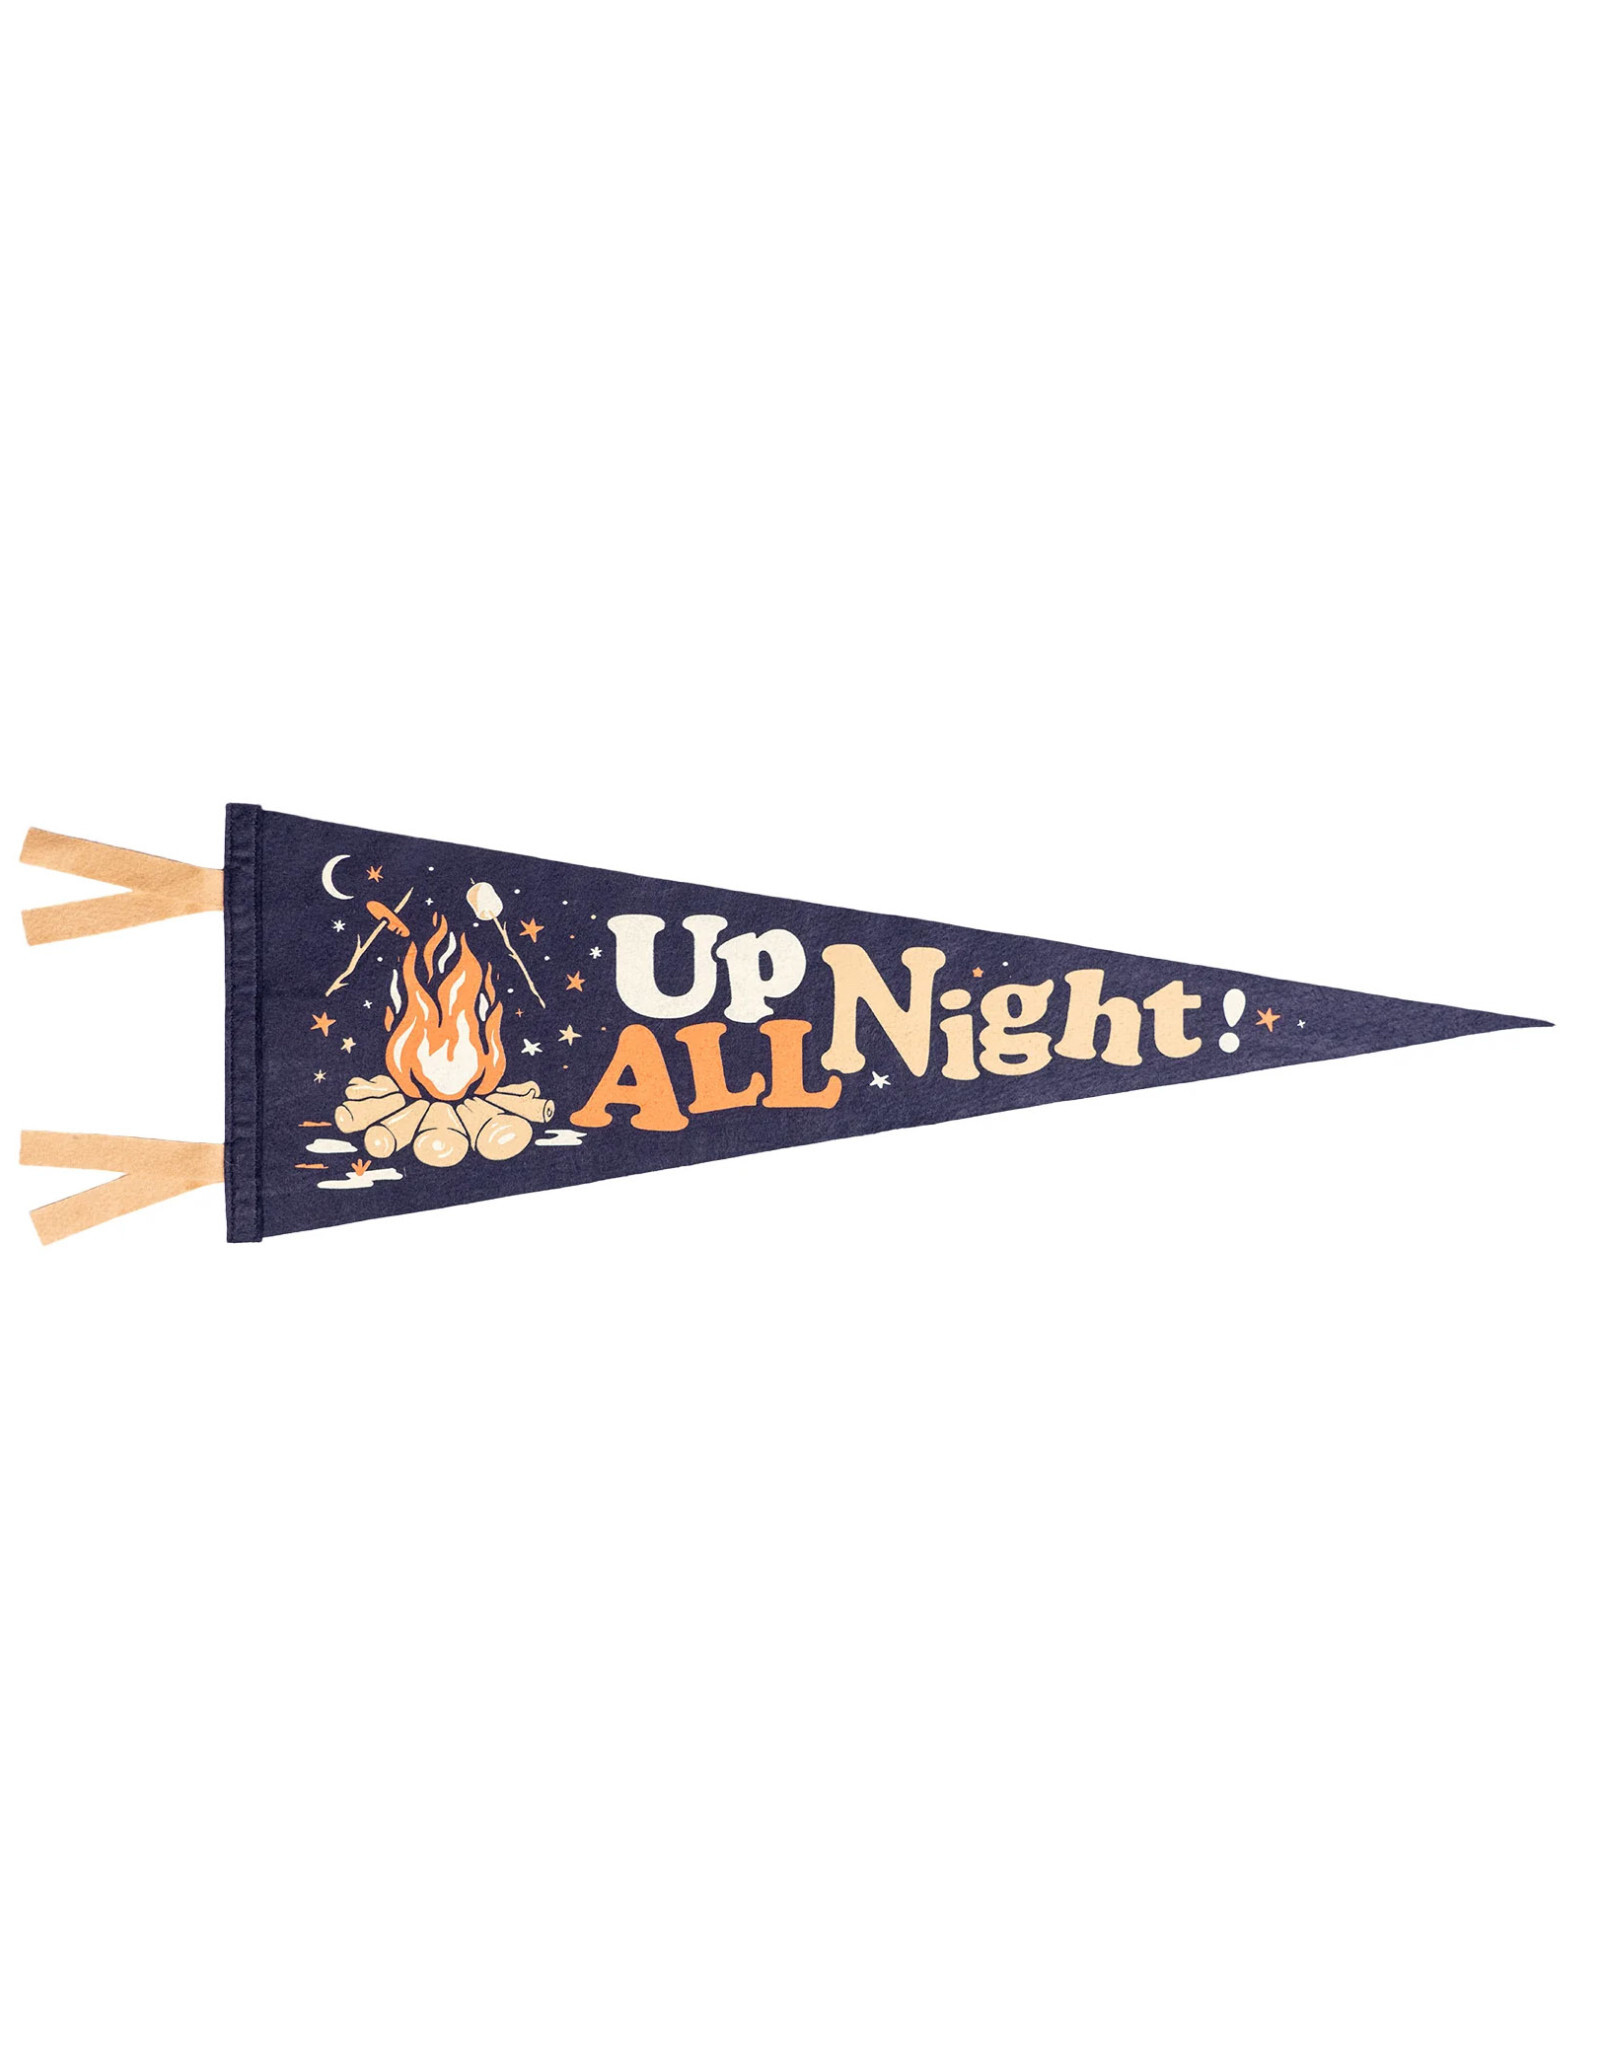 Oxford Pennant Up All Night Pennant